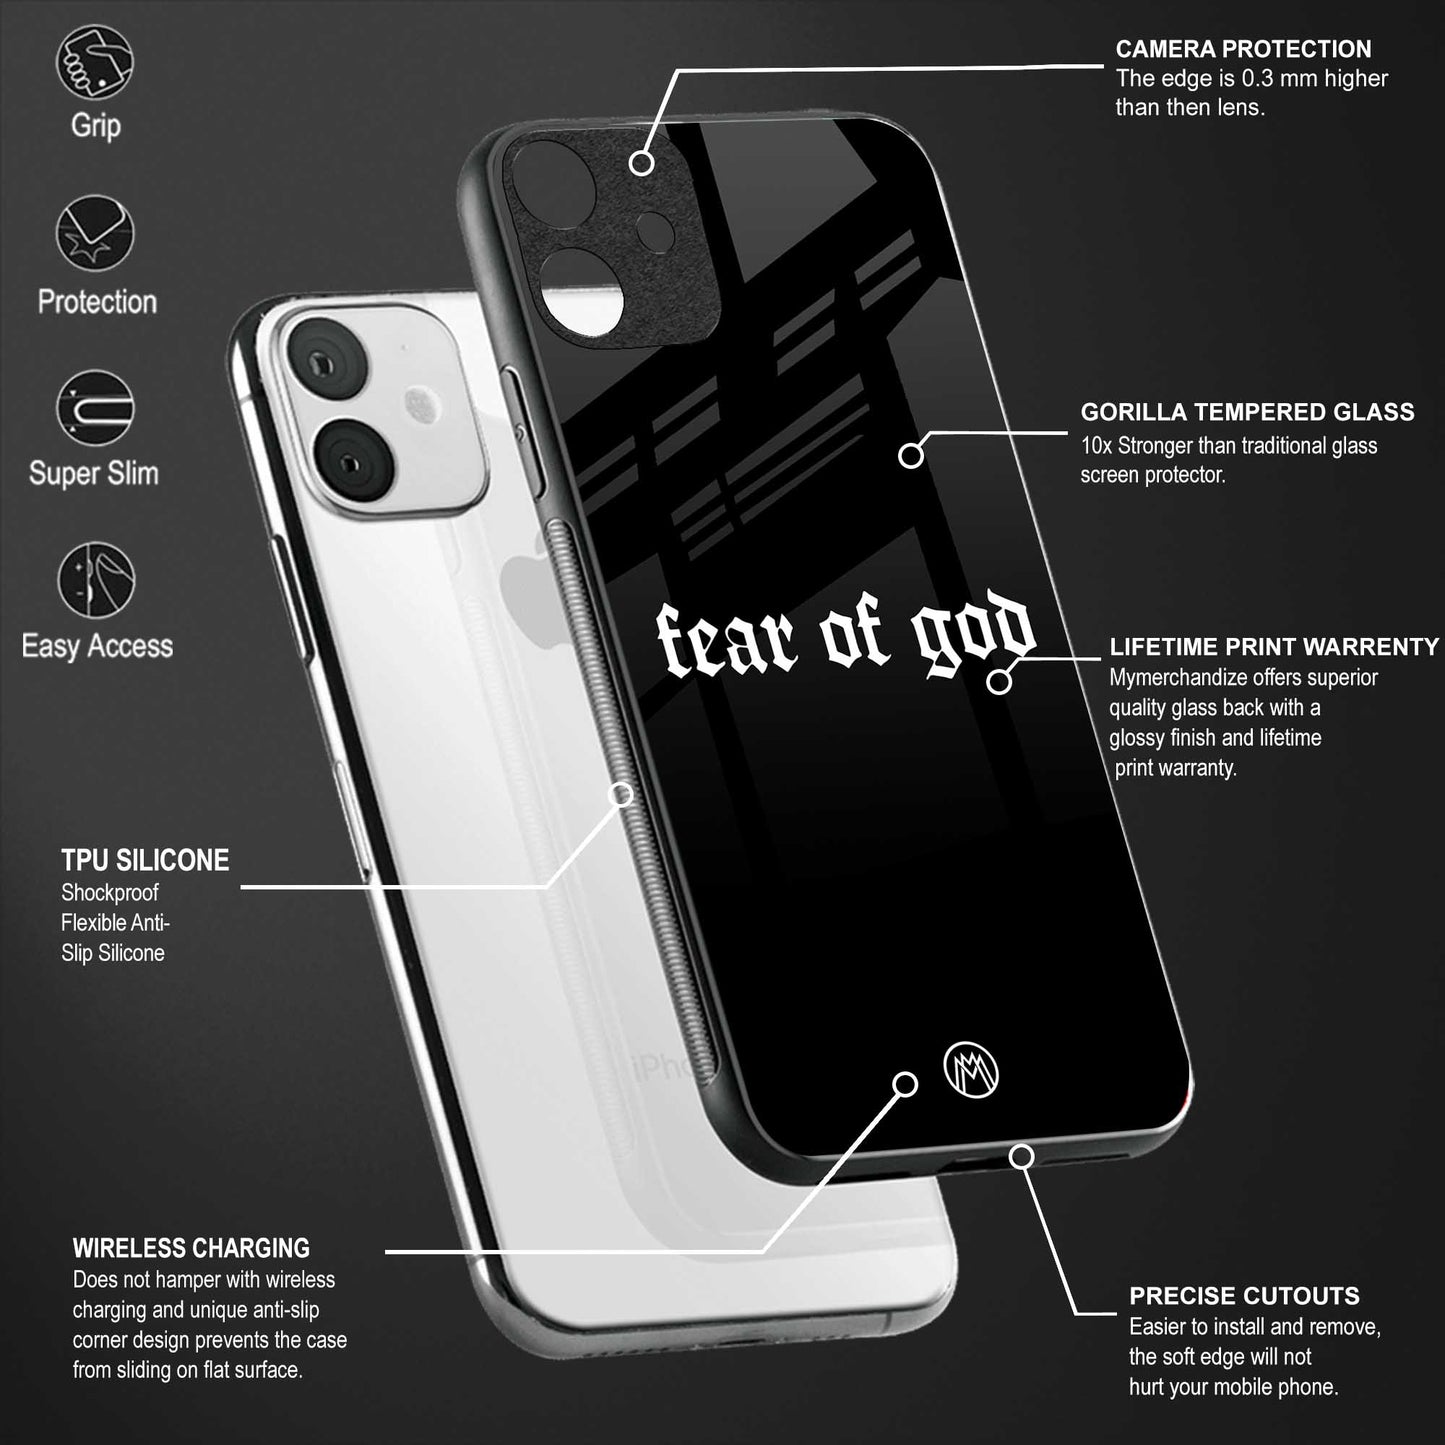 fear of god phone cover for poco m2